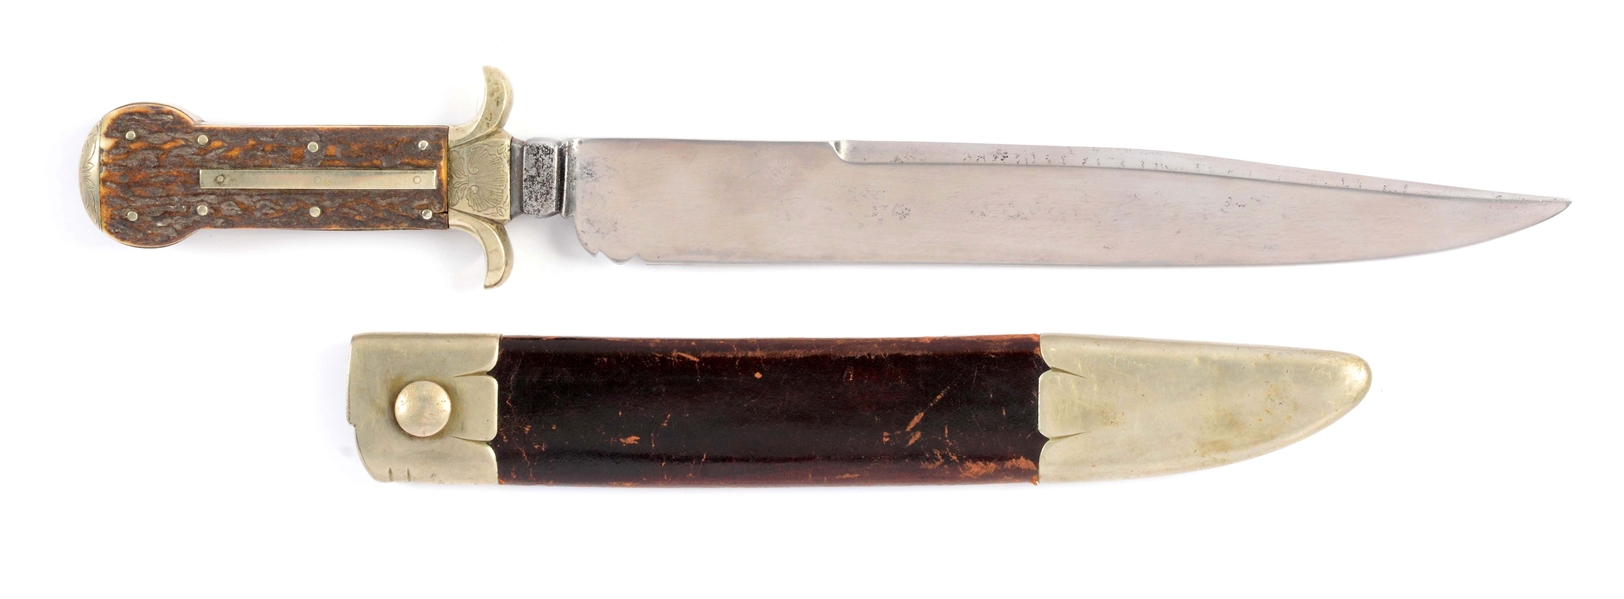 EARLY FORGED-BOLSTER DOGBONE BOWIE KNIFE MADE FOR WOLFE & CLARKS, NEW YORK.